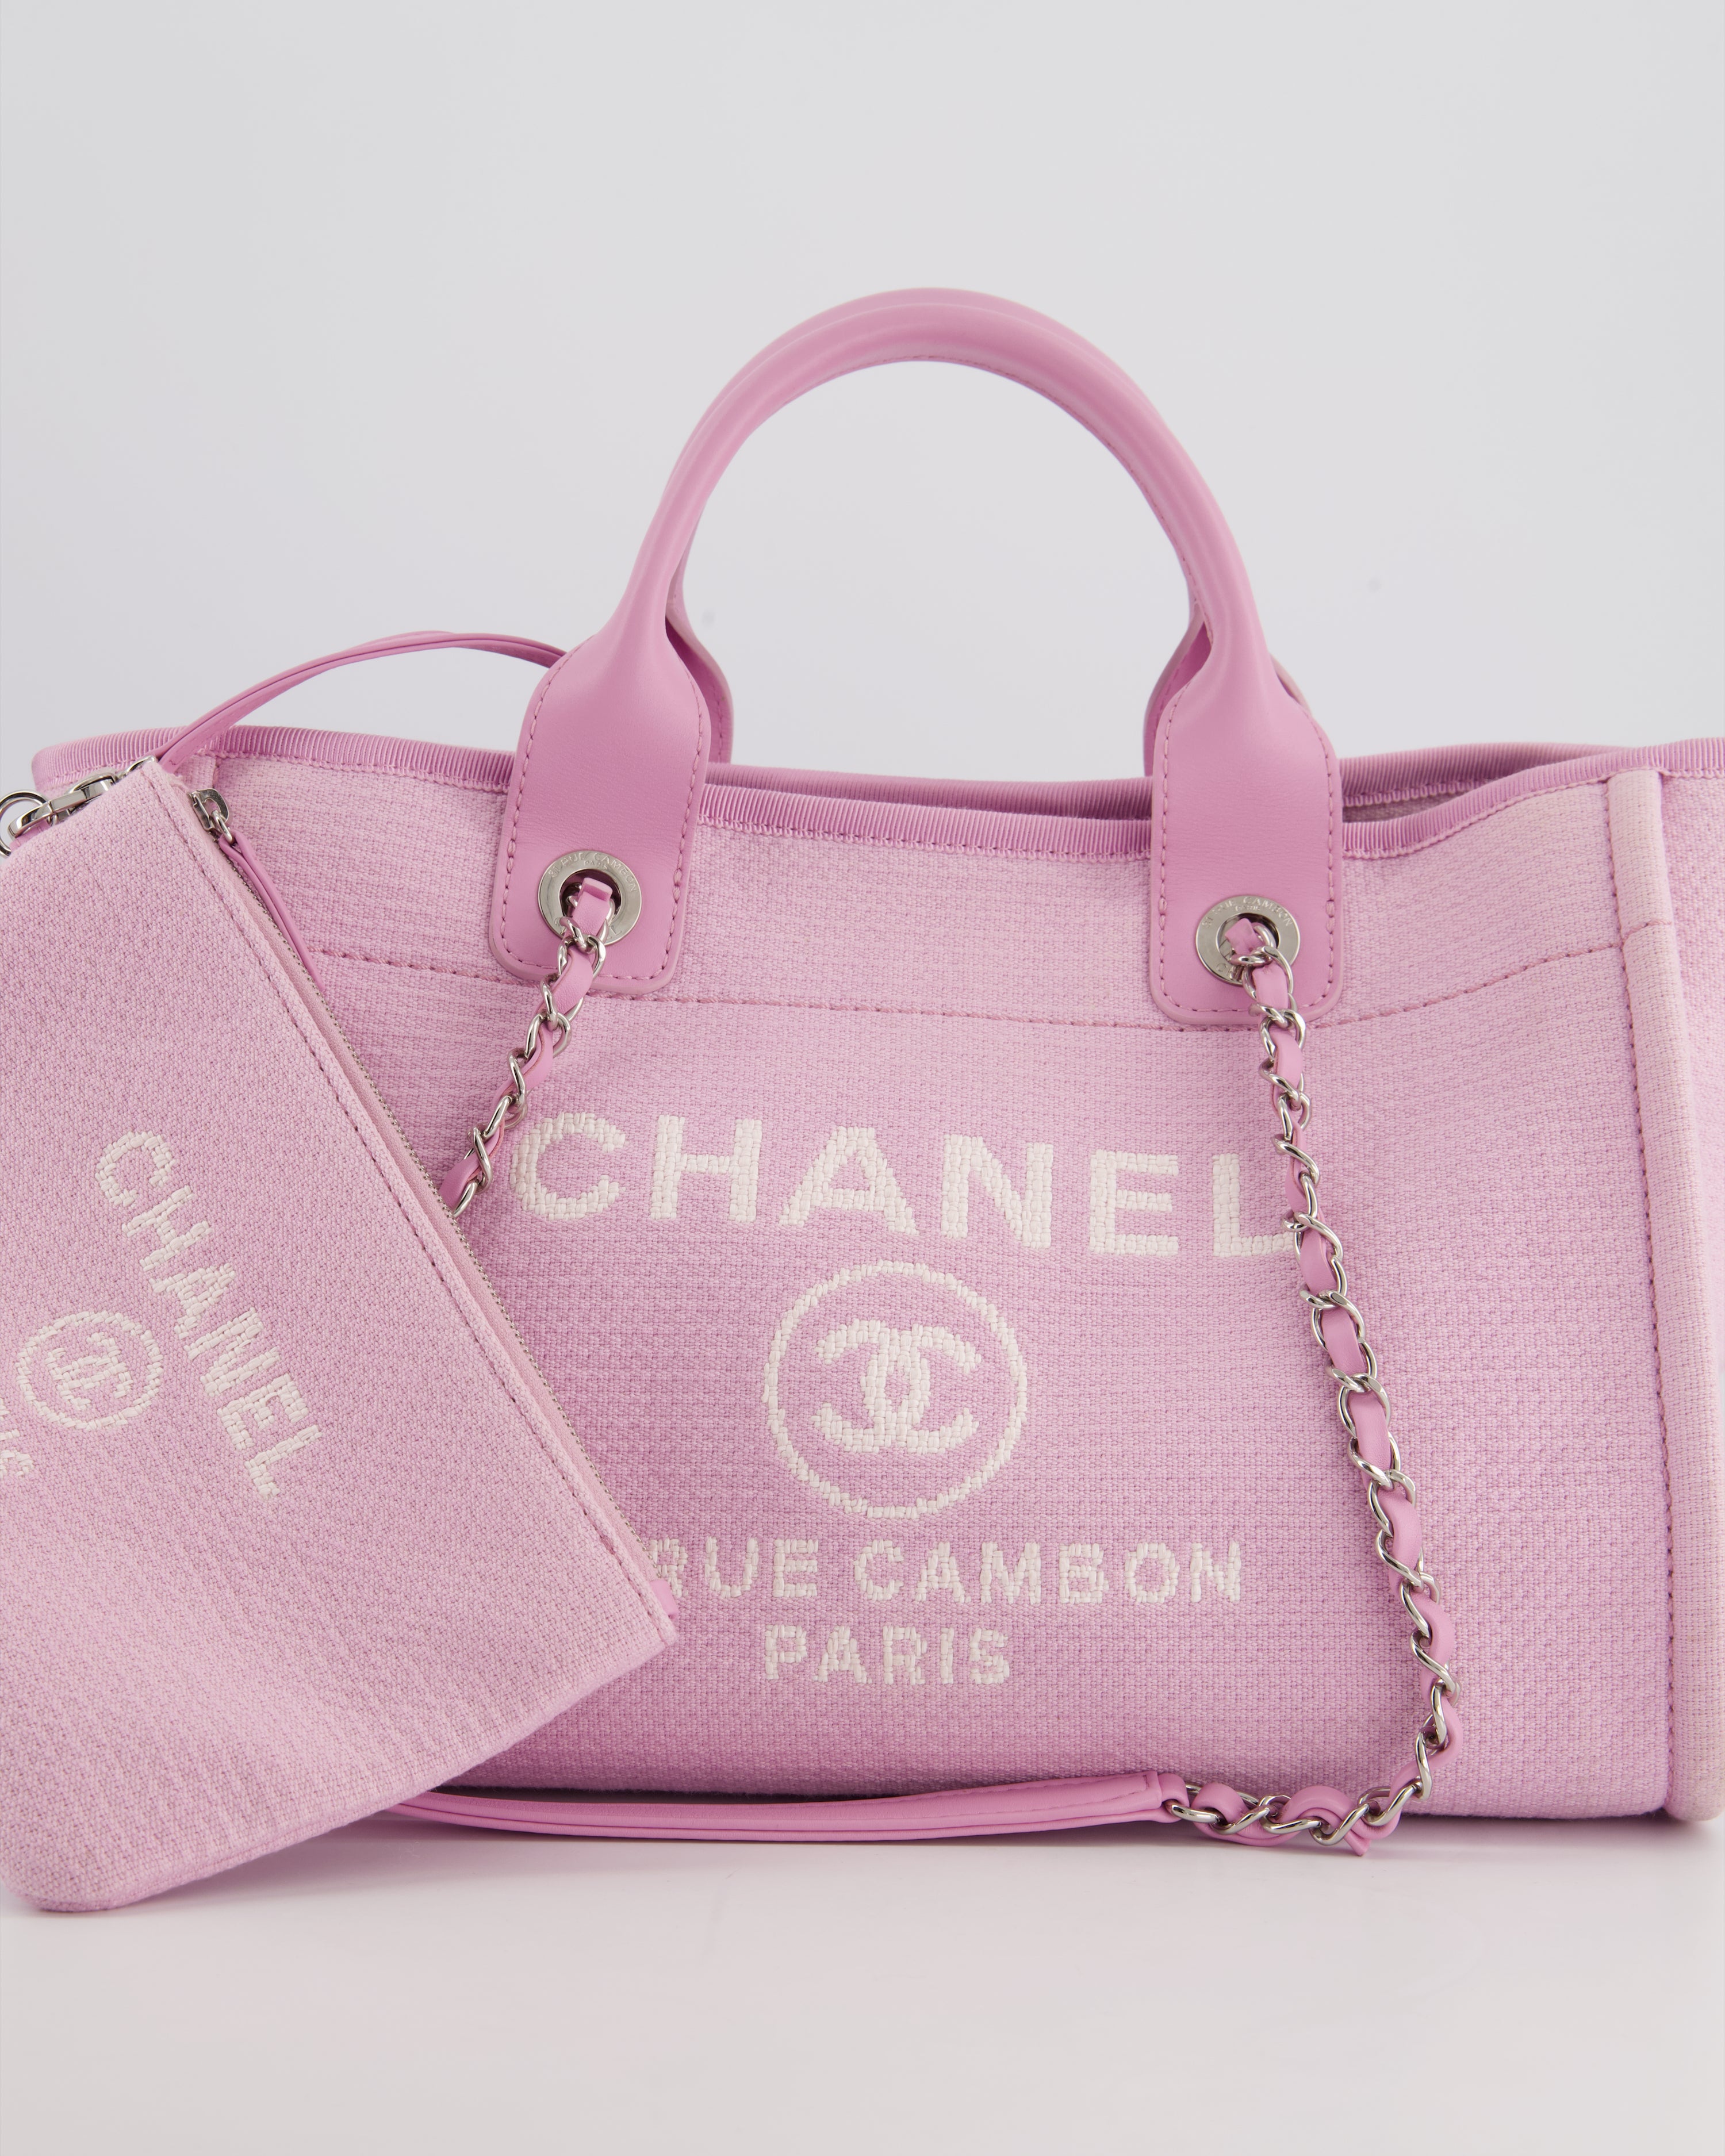 NEW SIZE* Chanel Lilac Canvas Small Deauville Tote Bag with CC